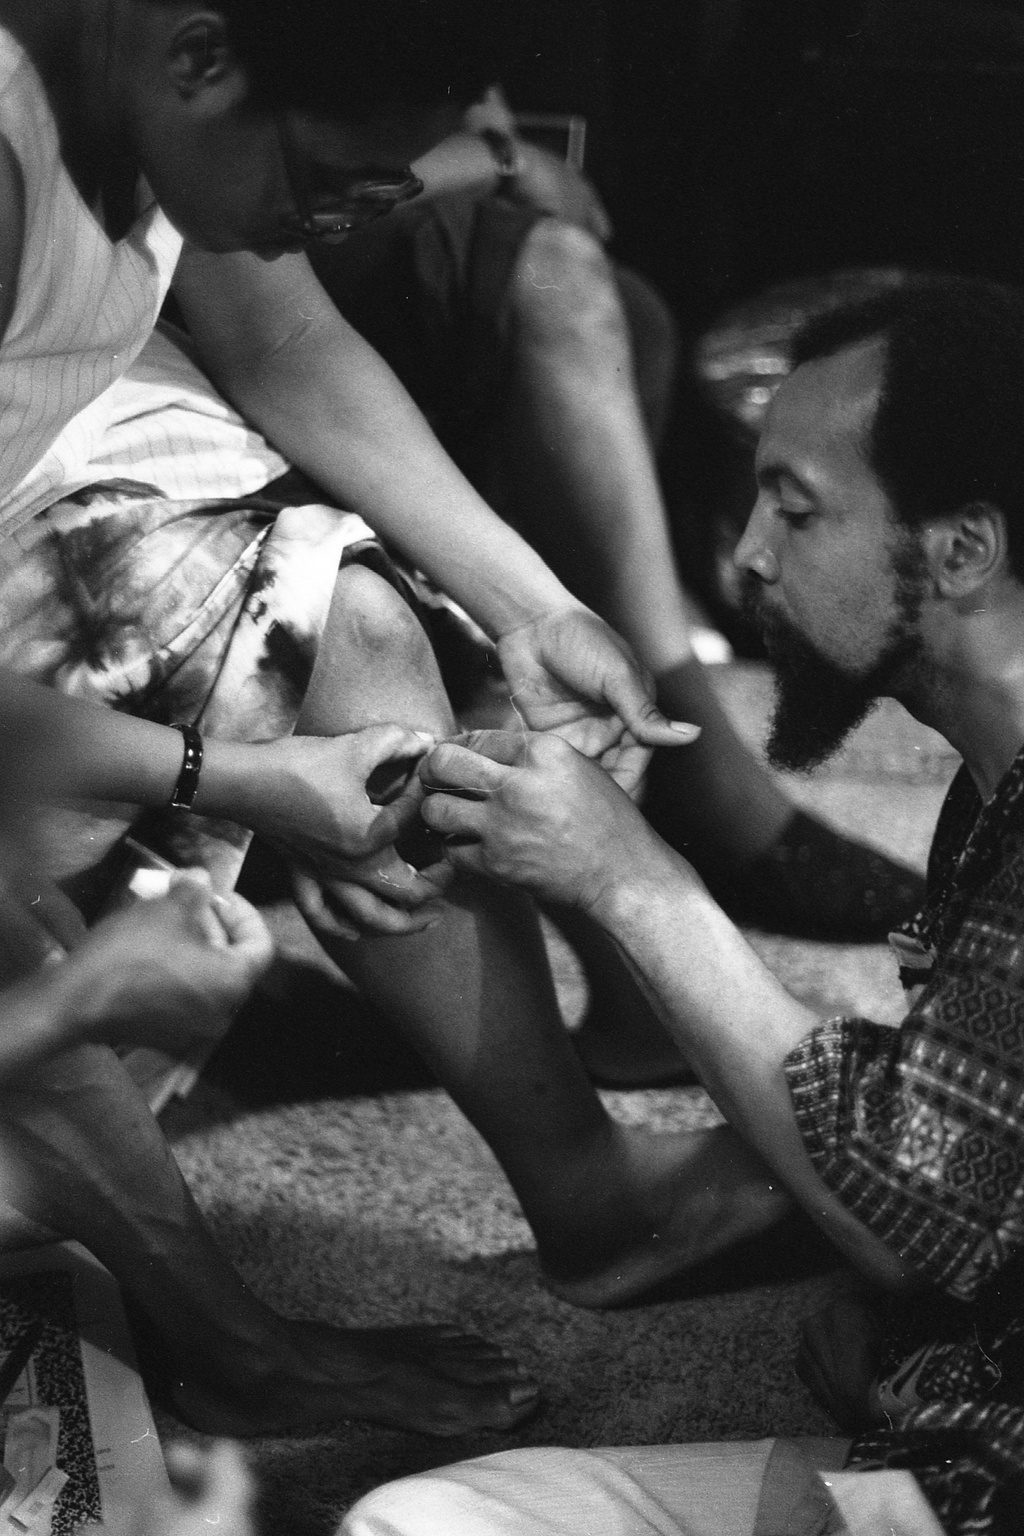 <p>A black and white photograph of a person in a short-sleeved collared shirt with a patchwork pattern performing acupuncture on another person's knee. Both figures are sitting.&nbsp;</p>